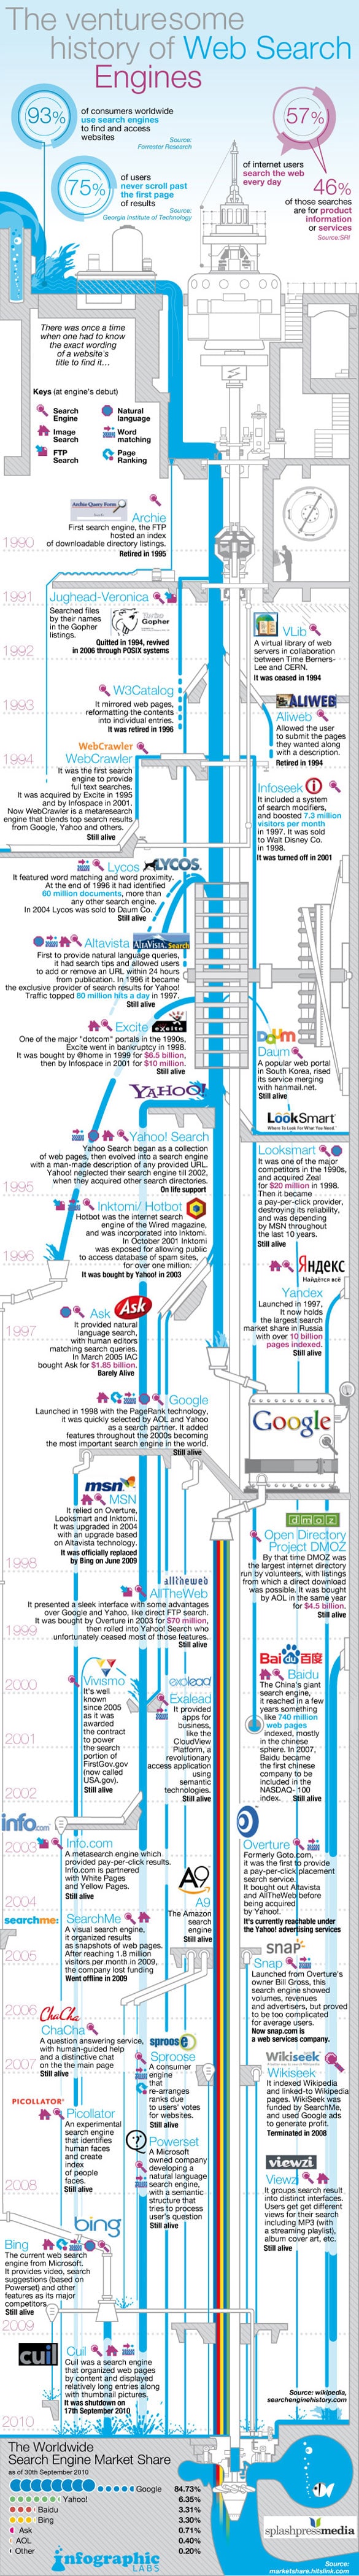 Search Engine Facts: Full Historical Timeline [Infographic]